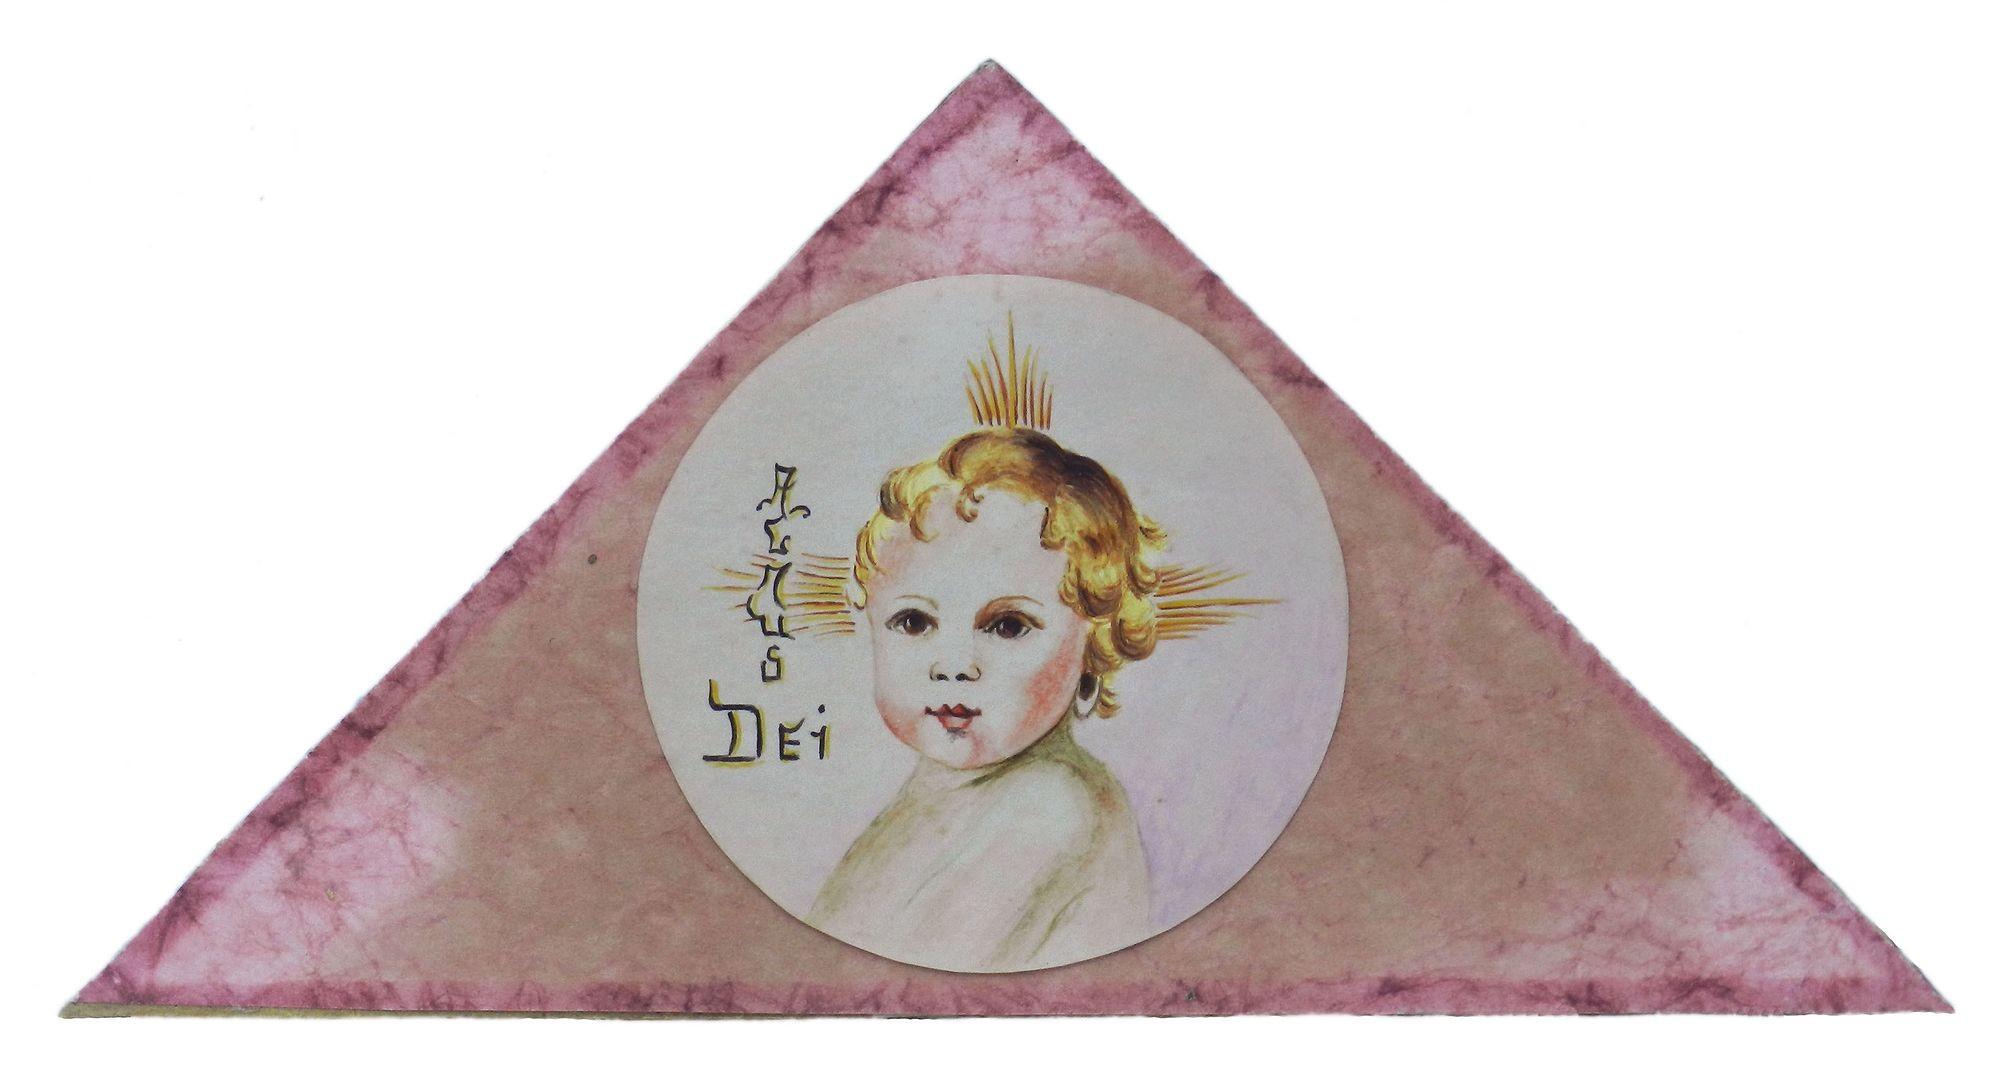 Portrait of Jesus Watercolour Painting c1920
Marked Annuo Dei
Small Paper painting easy to remove from the back 
Original watercolour dimensions are shown below 7.5cms 2.95ins
The card back measures Base 20cms 7.8ins 10cms 3.93in.